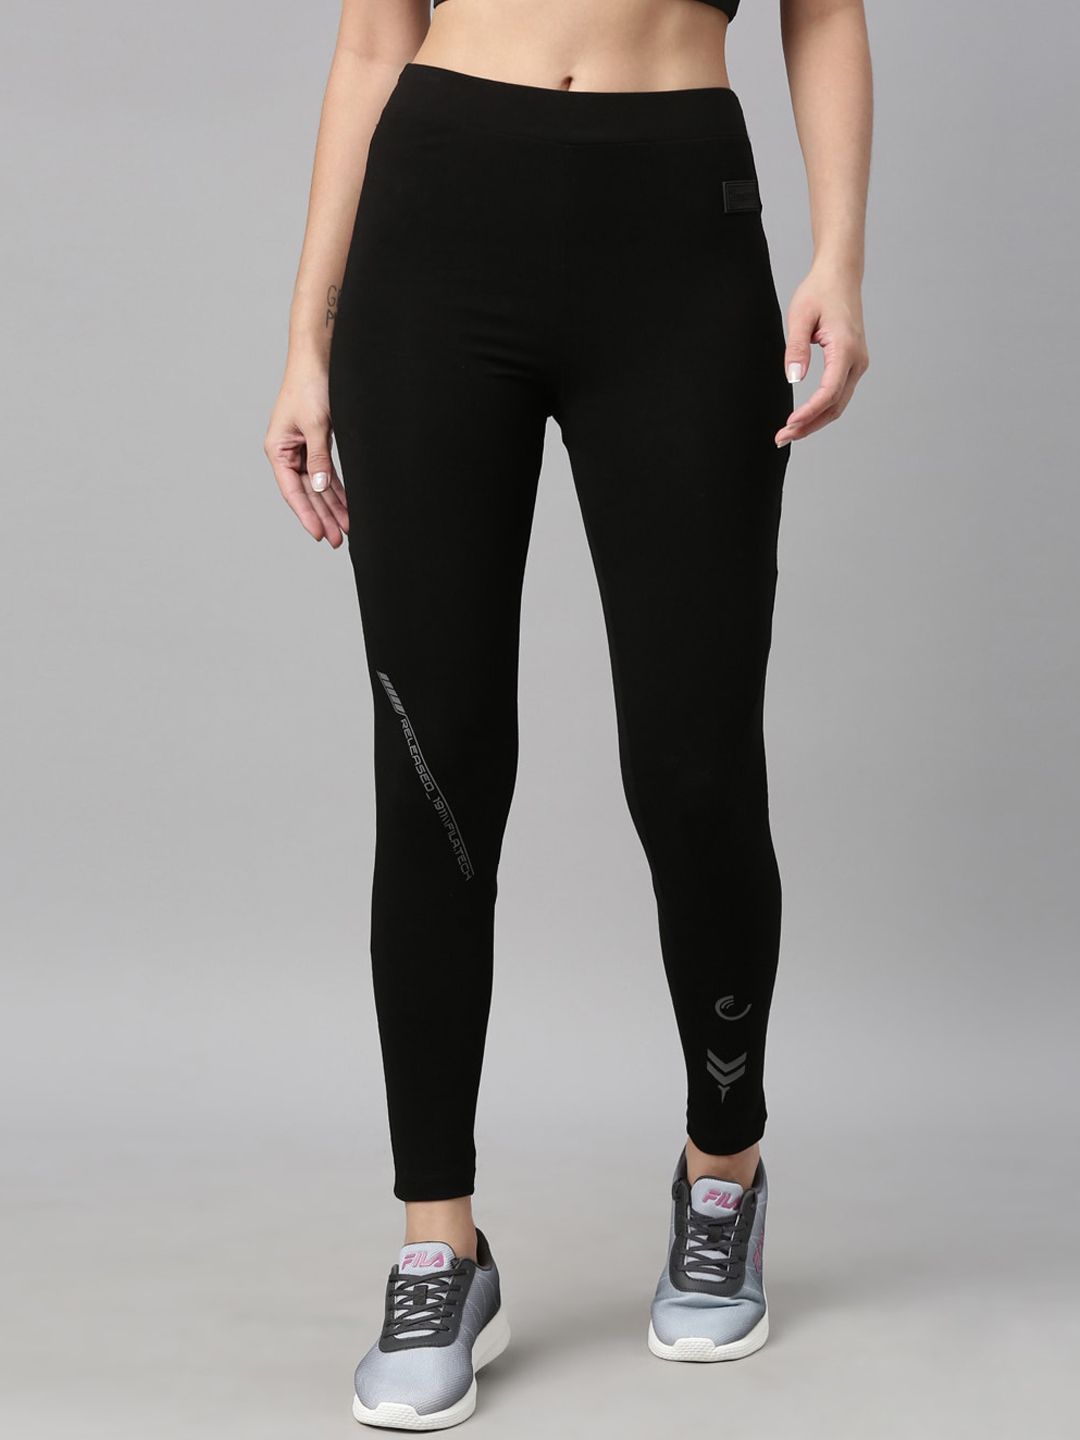 FILA Women Black Solid Cotton Track Pant Price in India